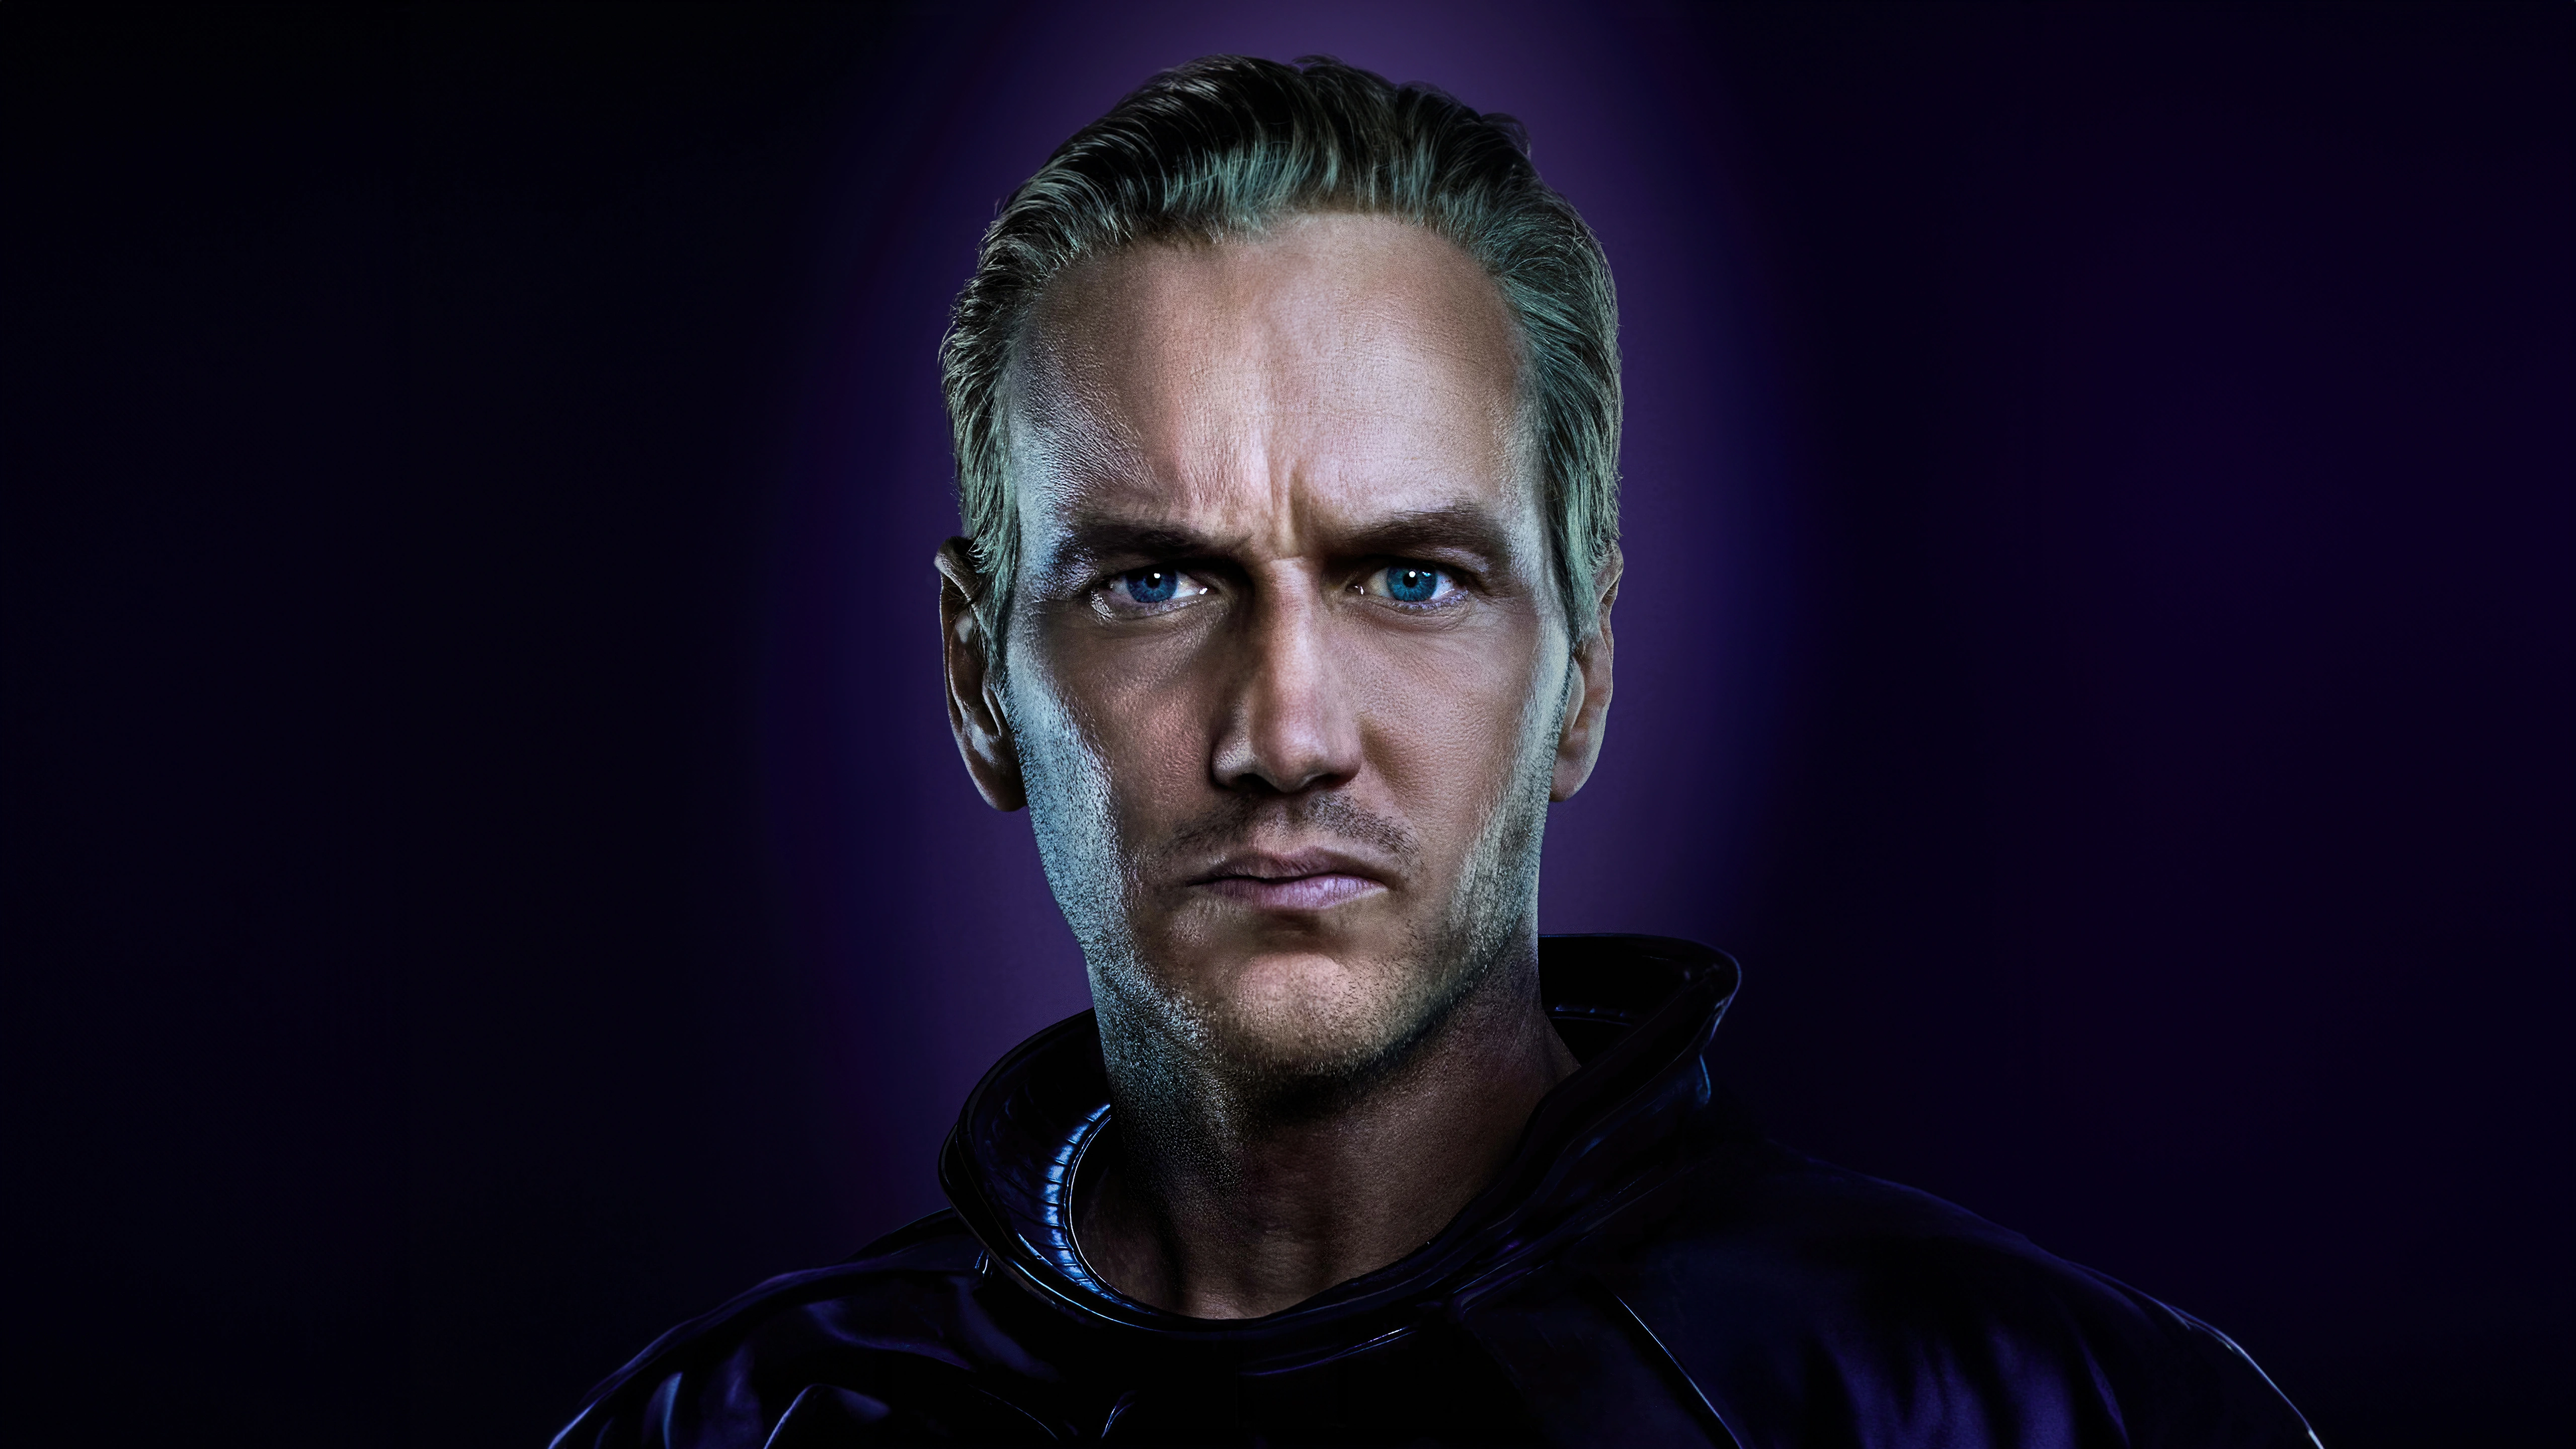 patrick wilson as king orm in aquaman and the lost kingdom 3g.jpg